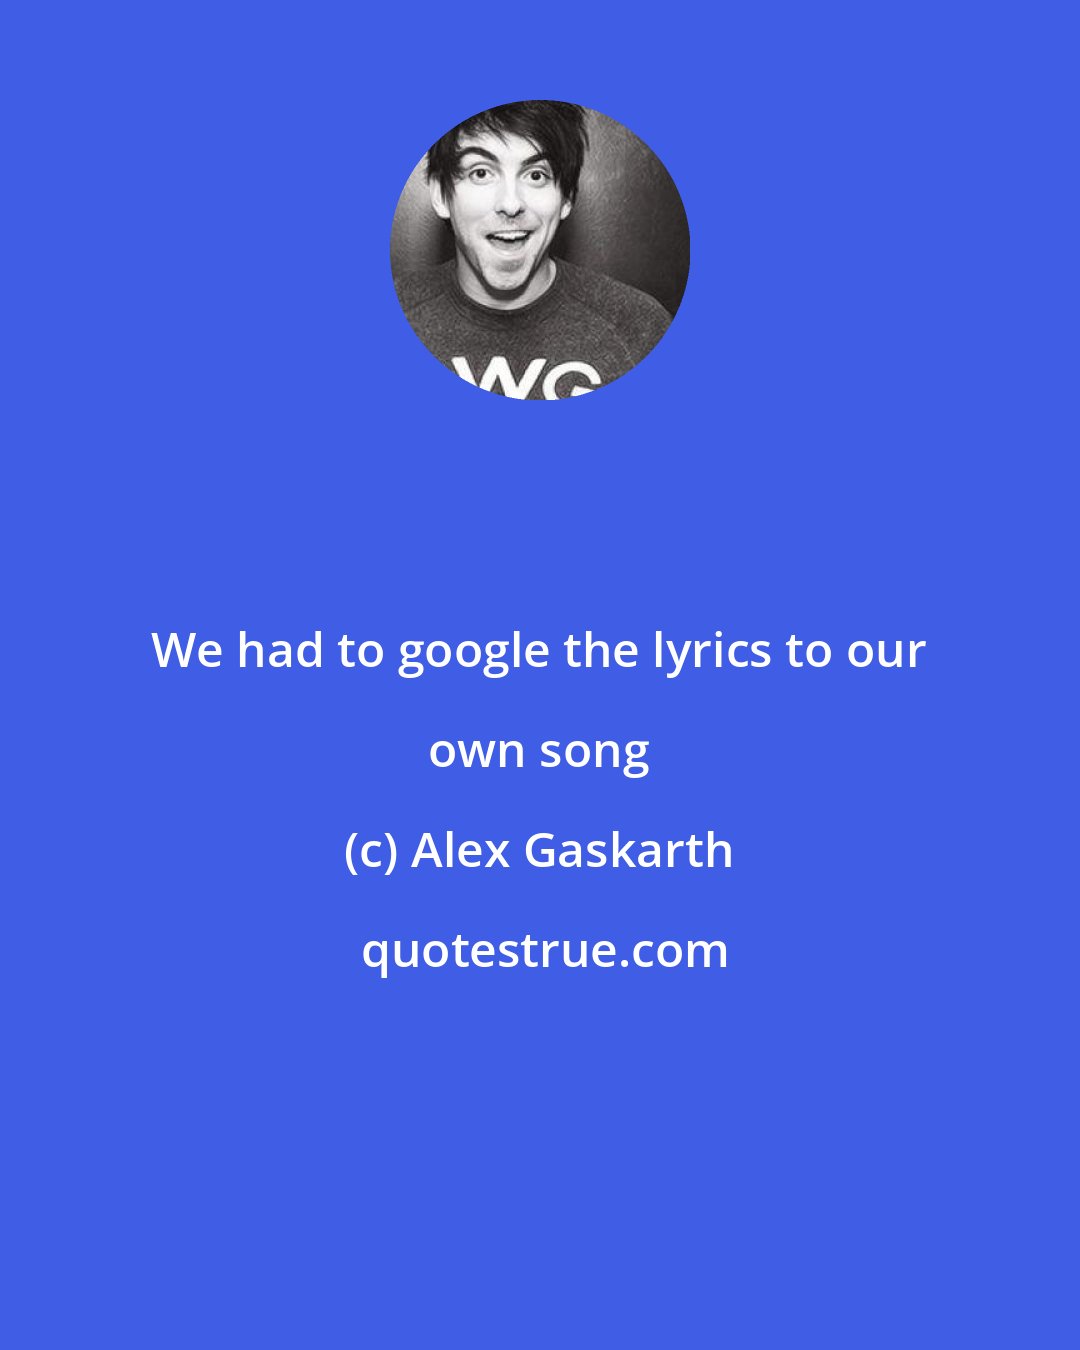 Alex Gaskarth: We had to google the lyrics to our own song